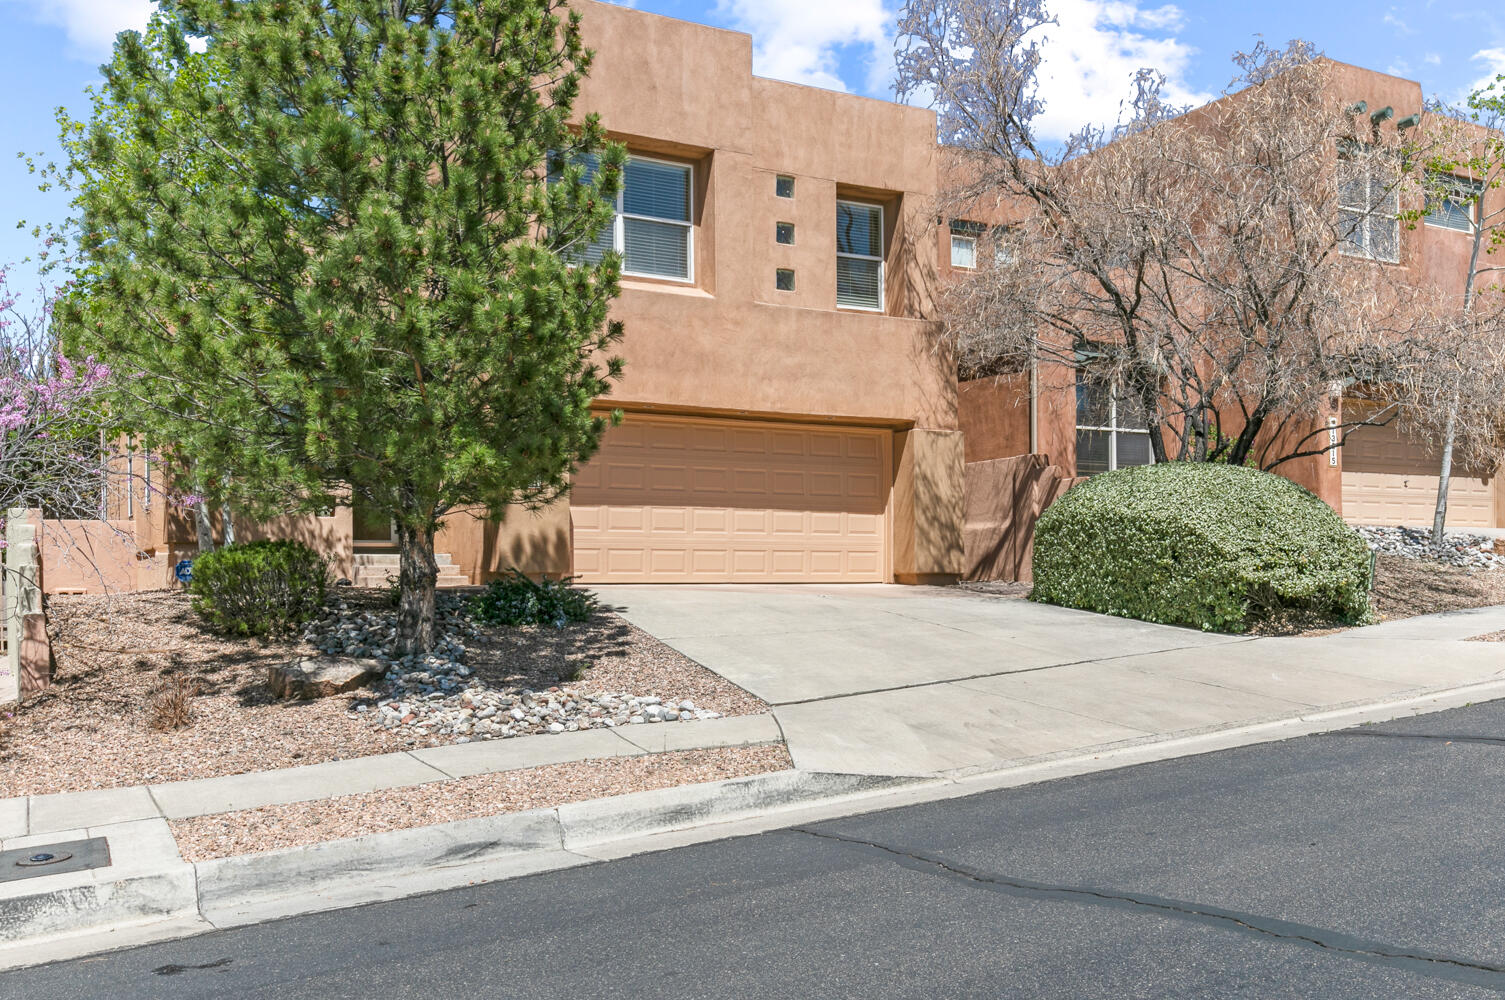 Perfect gem in gated community in High Desert. So many bells and whistles!  New HVAC system with refrigerated air installed in 2023, and Smart Ecobee Wi-Fi enabled thermostat. ! Bright open kitchen with tons of natural light overlooking the sunk in living room with cozy gas fireplace and view of the lush green backyard.  Large primary suite and bathroom with double vanity, garden tub and walk in shower. Loft is a perfect spot for workout room, TV den or office. Front room can be used as another dining area, or formal living room. Backyard is filled with green grass and blooming shrubs including honeysuckles. Garage is perfect for those with lots of ''stuff''. Large cabinetry and hanging shelves for all your goodies. Community pool is perfect to cool off in. Enjoy this secure neighborhood.